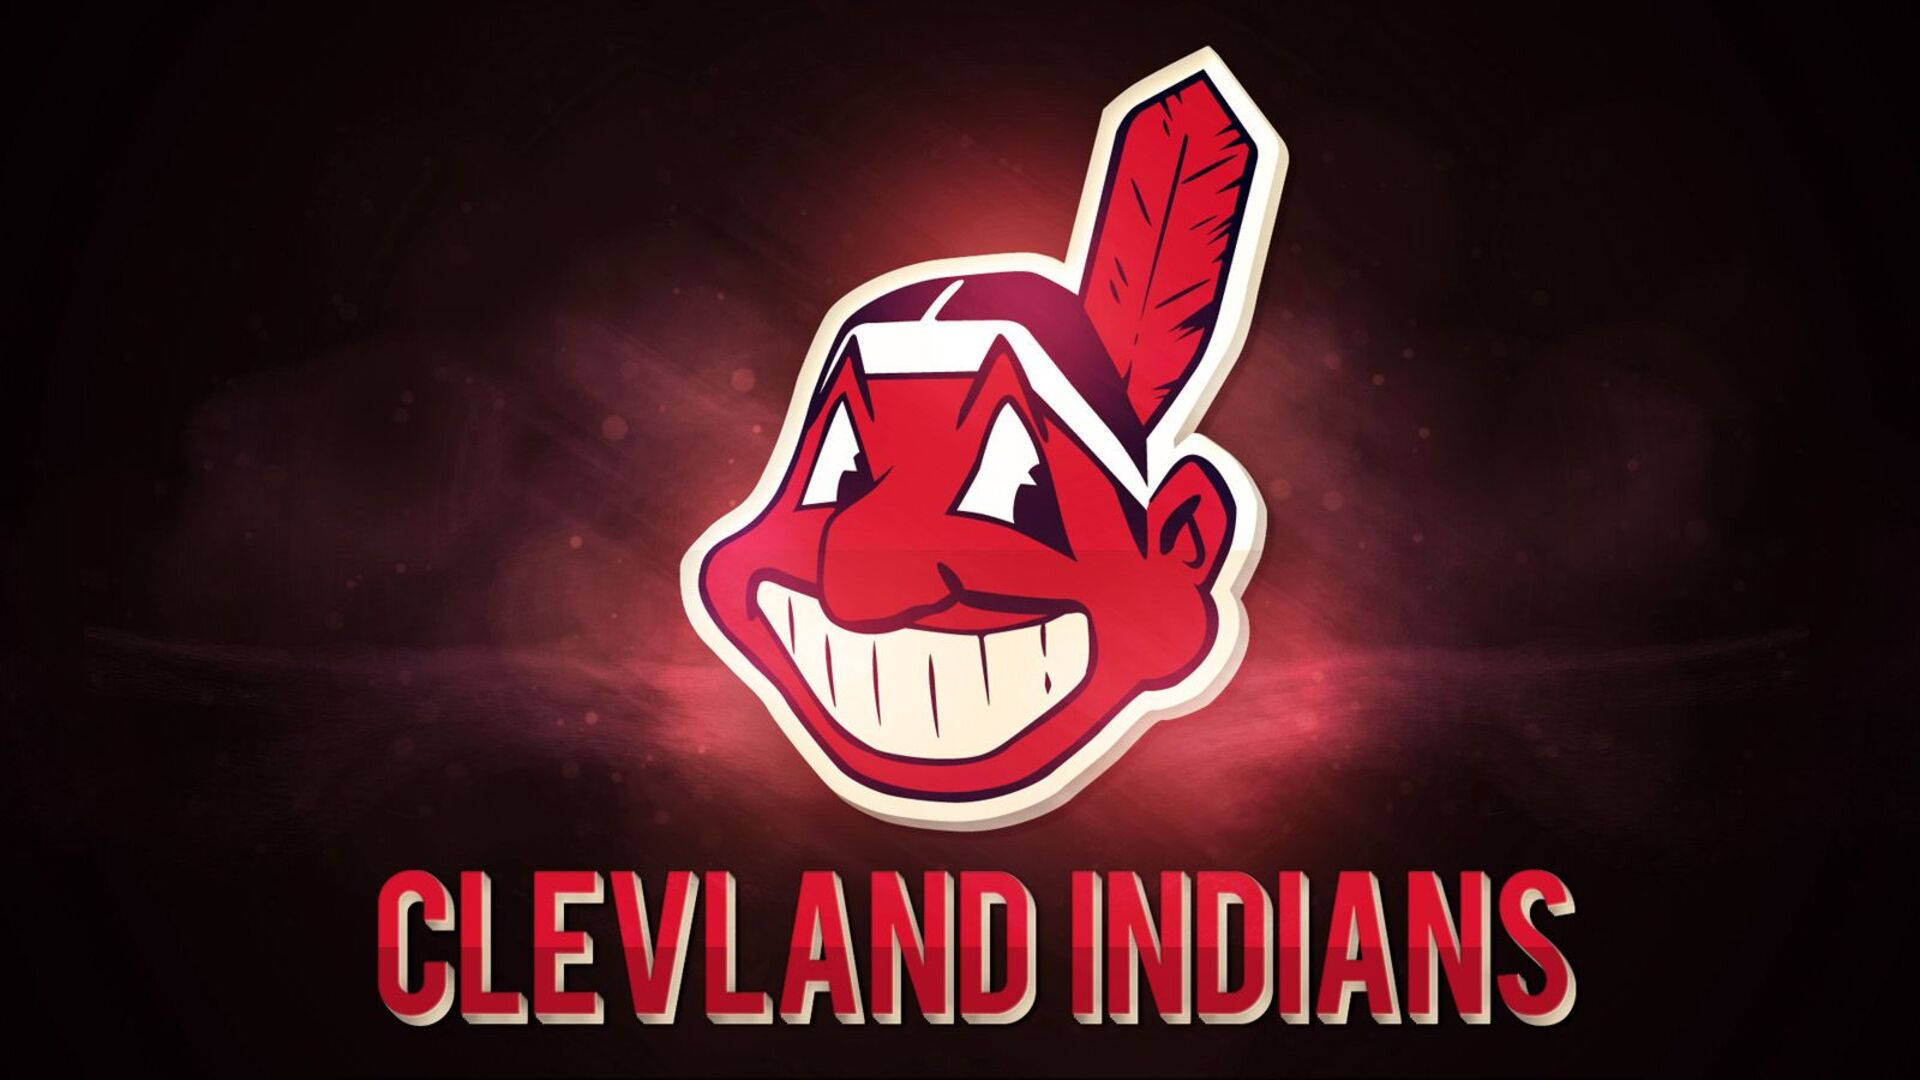 Cleveland Indians Wallpapers - Top Free Cleveland Indians